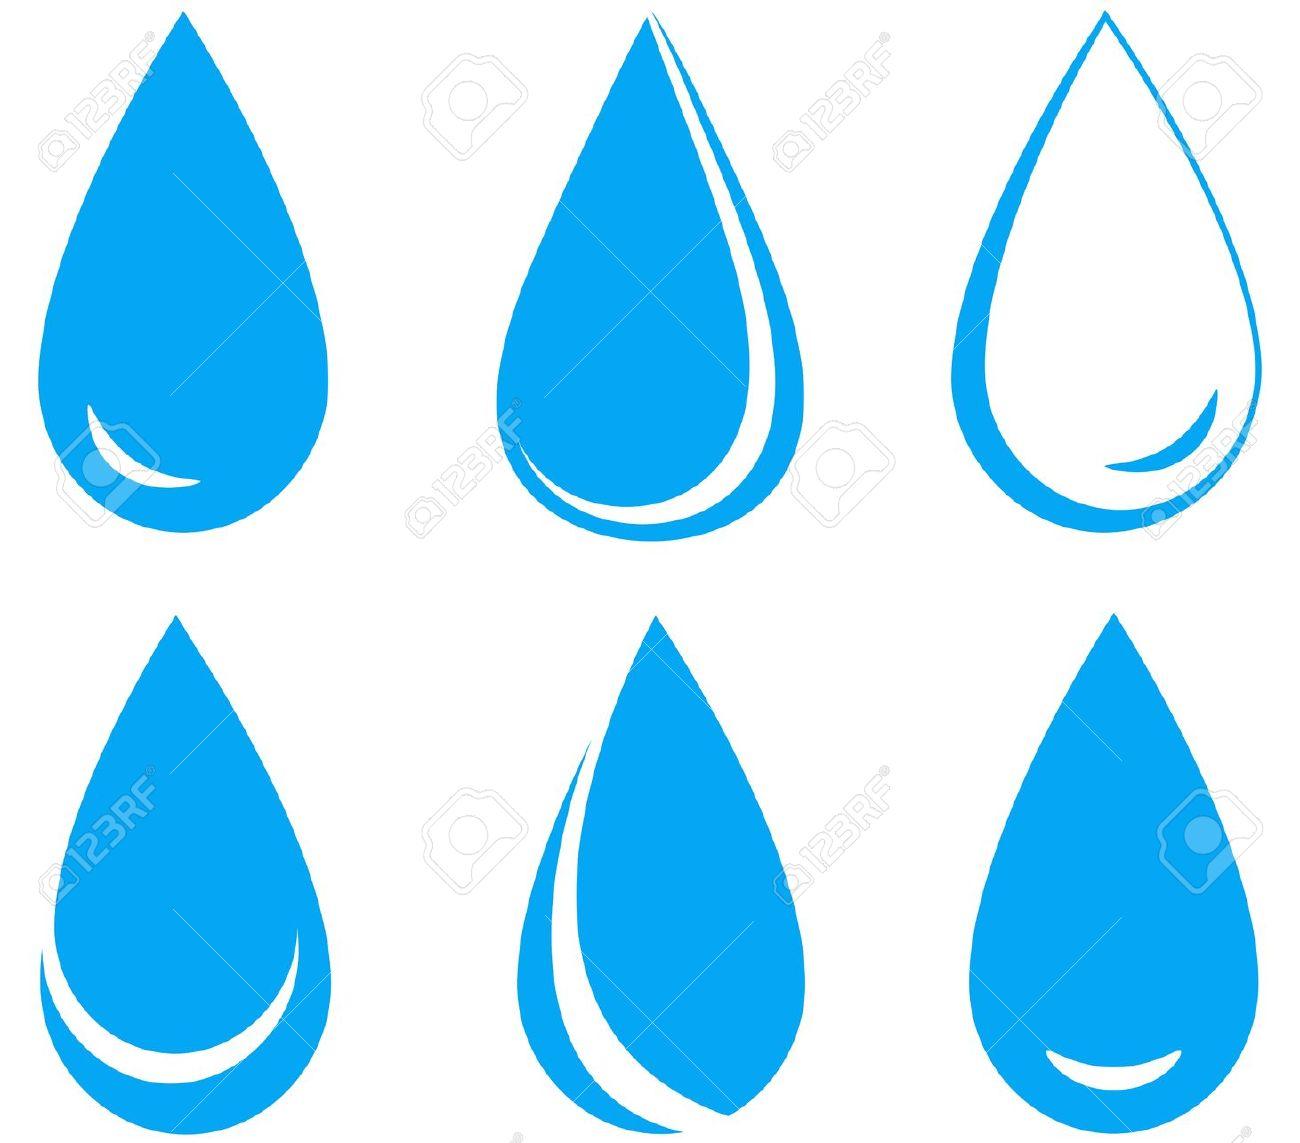 Blue Water Drop Logo - Water Drop Clipart at GetDrawings.com | Free for personal use Water ...